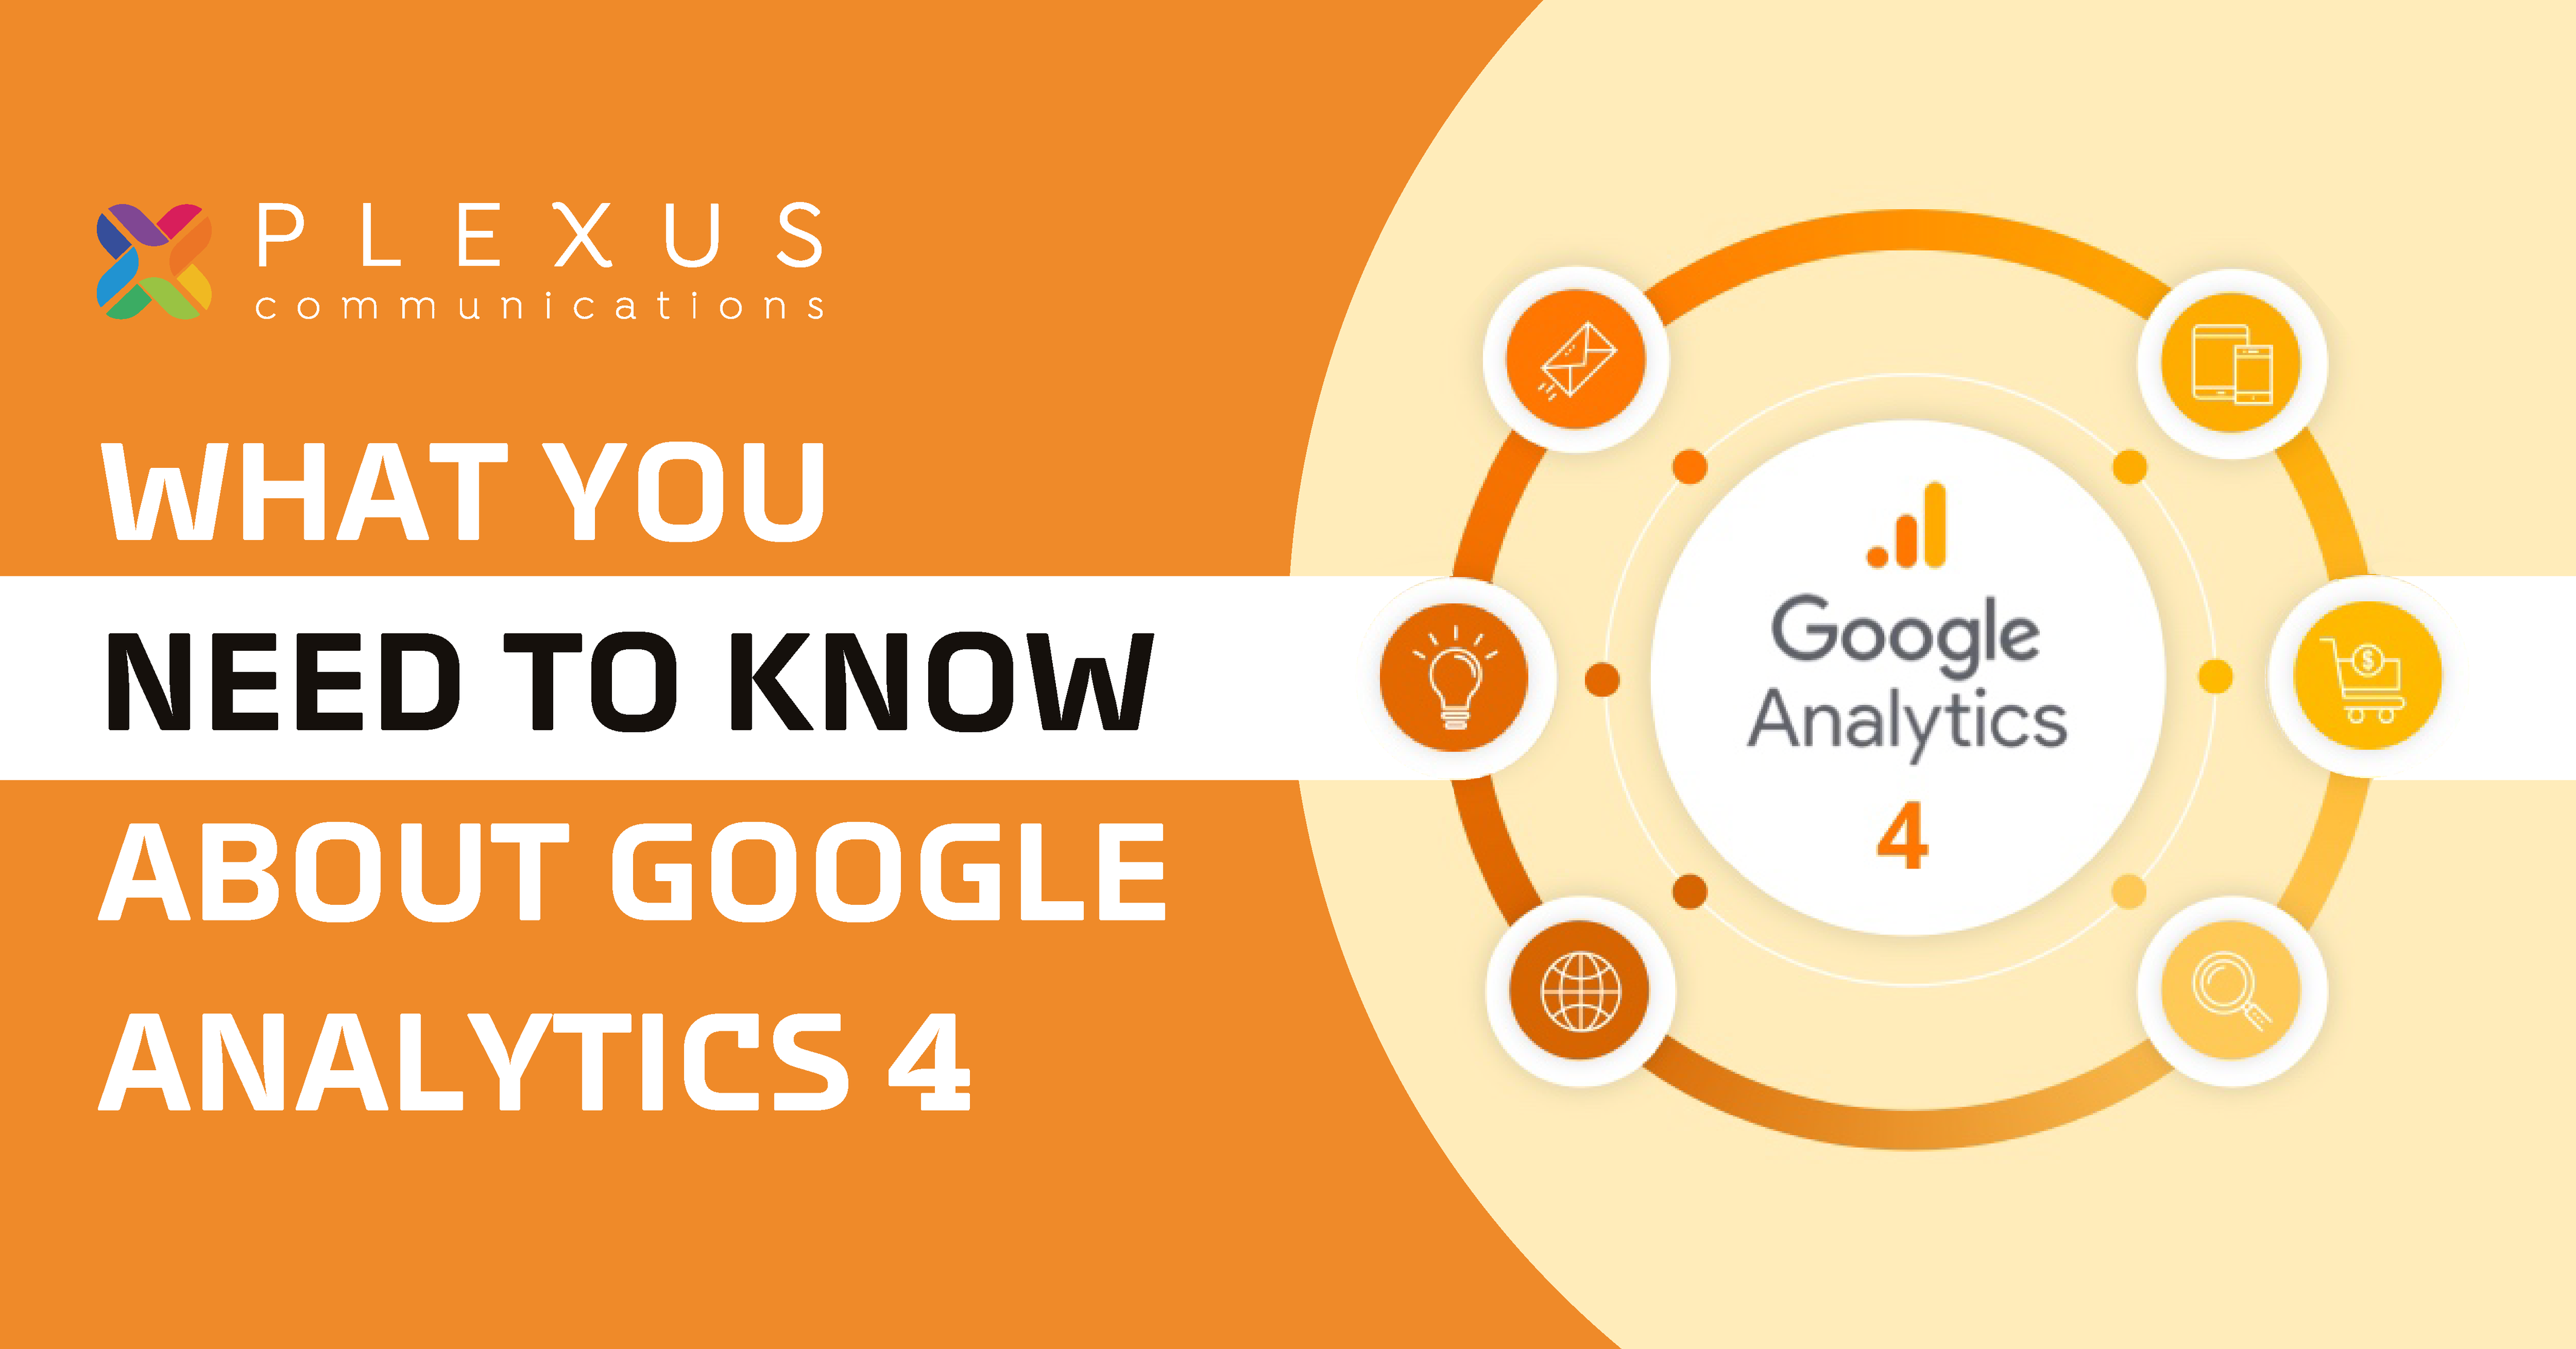 Discover the transformative features of Google Analytics 4 (GA4) and why it's essential for modern digital marketing. Learn about its machine learning capabilities, cross-device tracking, and how it works without relying on cookies.